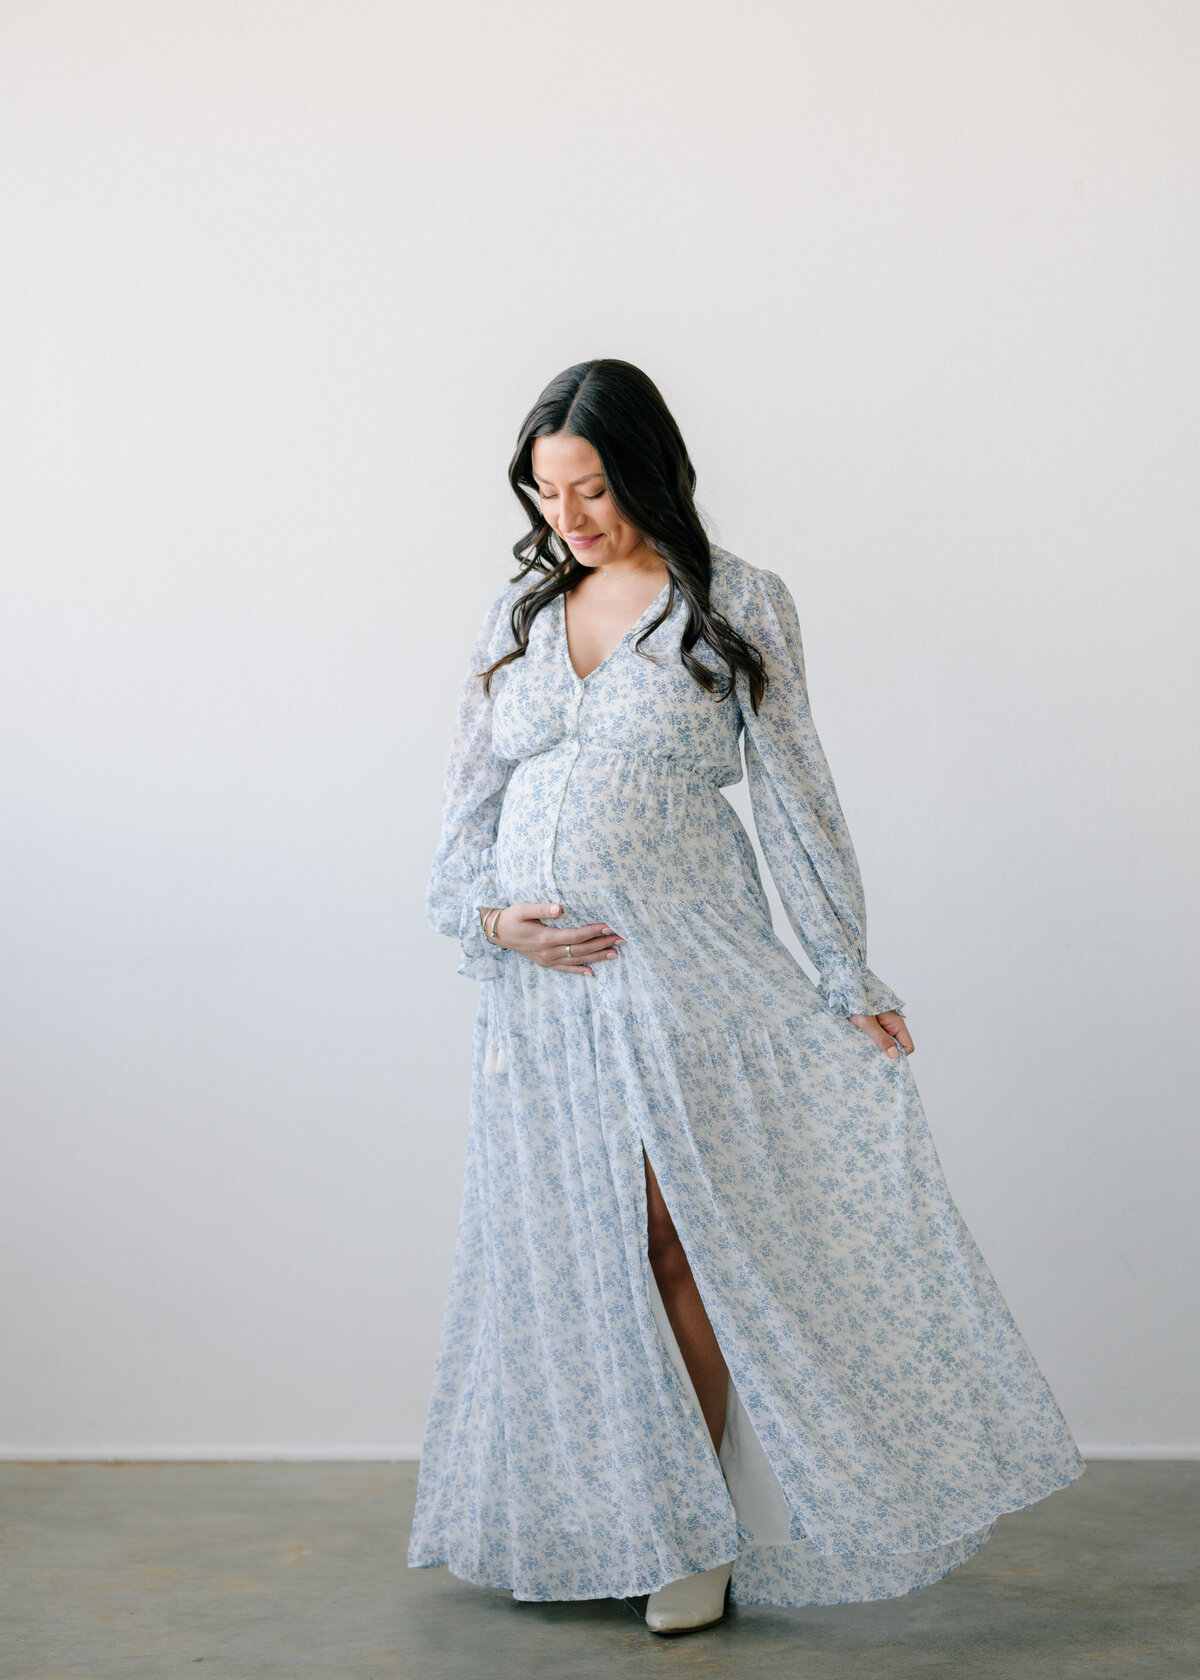 Pregnant woman in a long floral dress  and twirling while she holds her baby bump- photo by Maegan R Photography